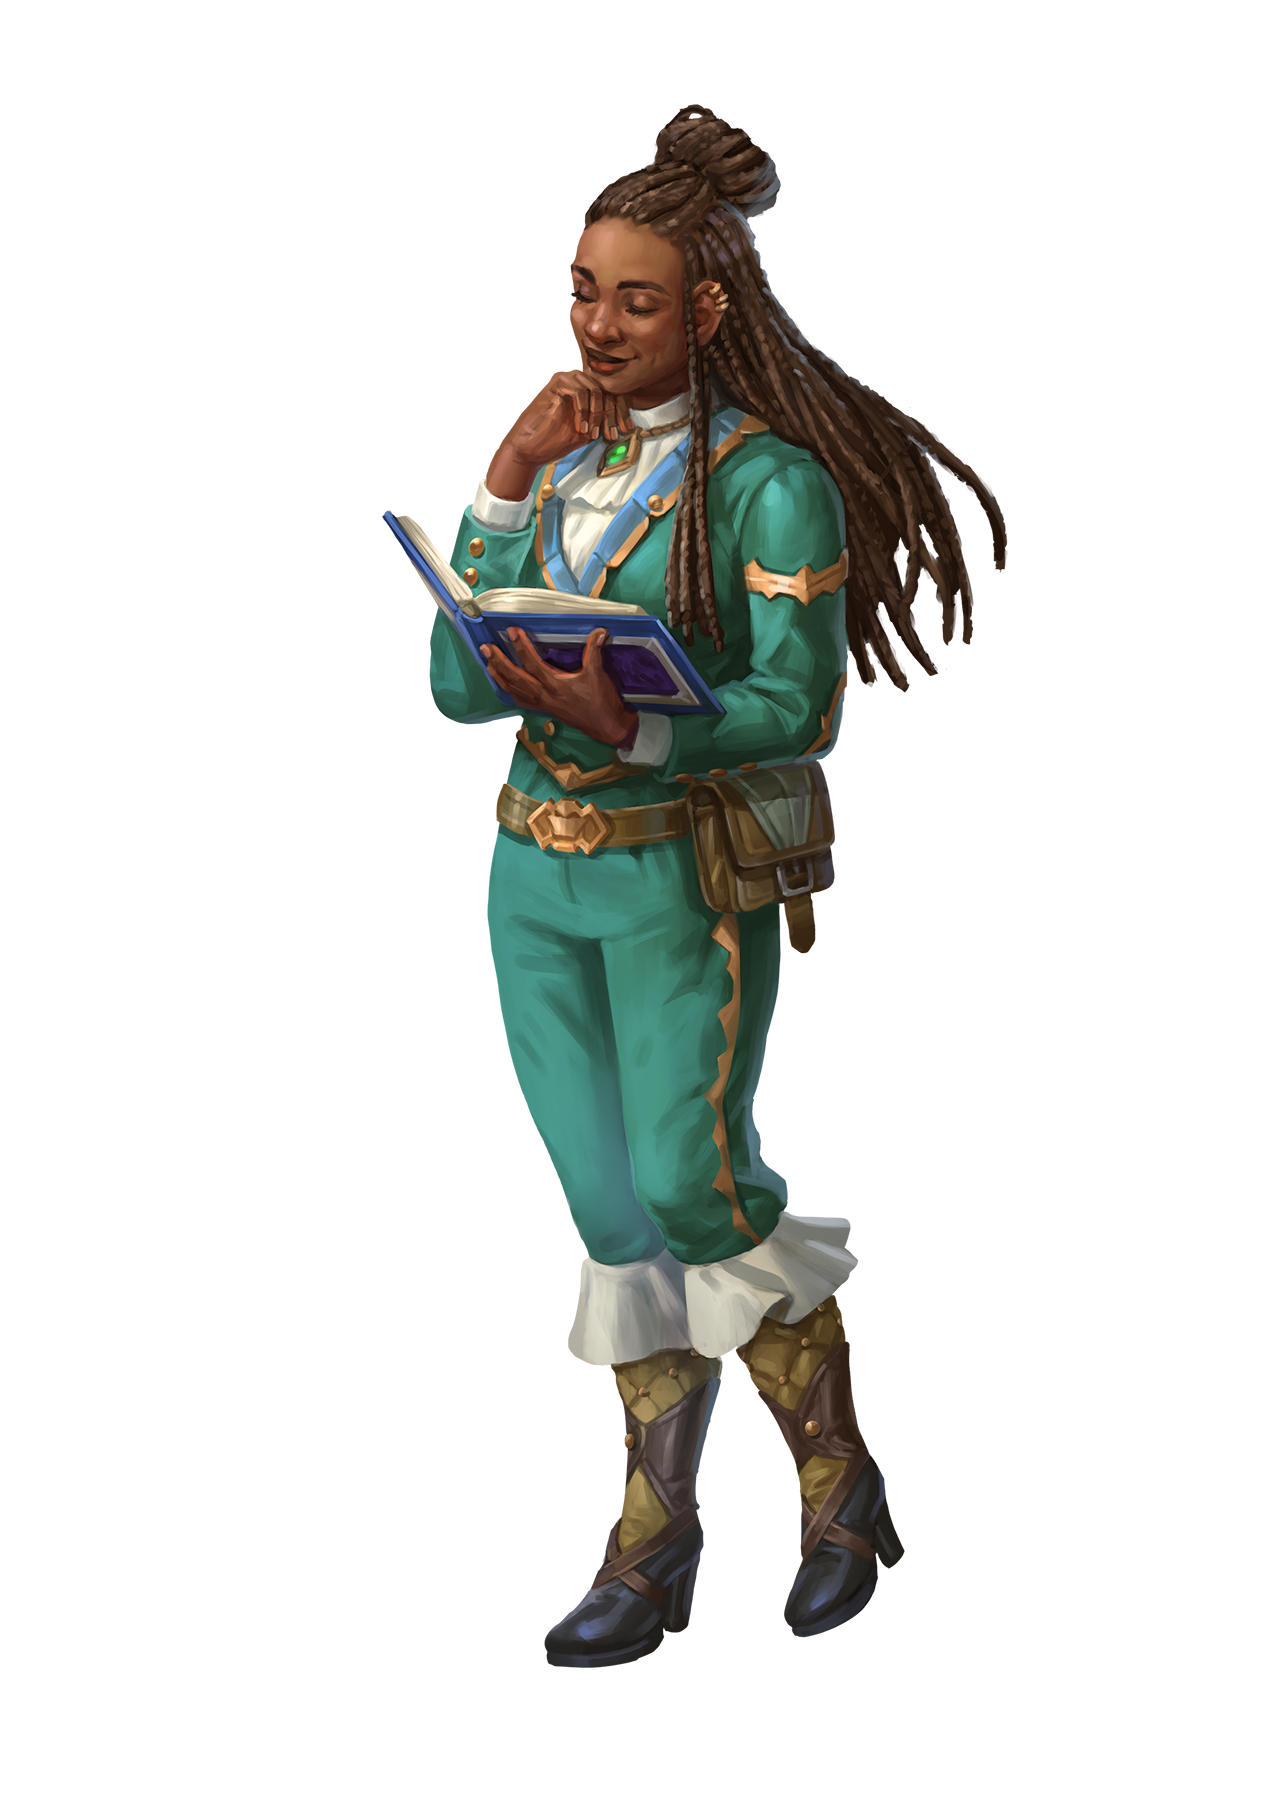 A dark skinned young woman dressed in teal with gold trim, reading from a book